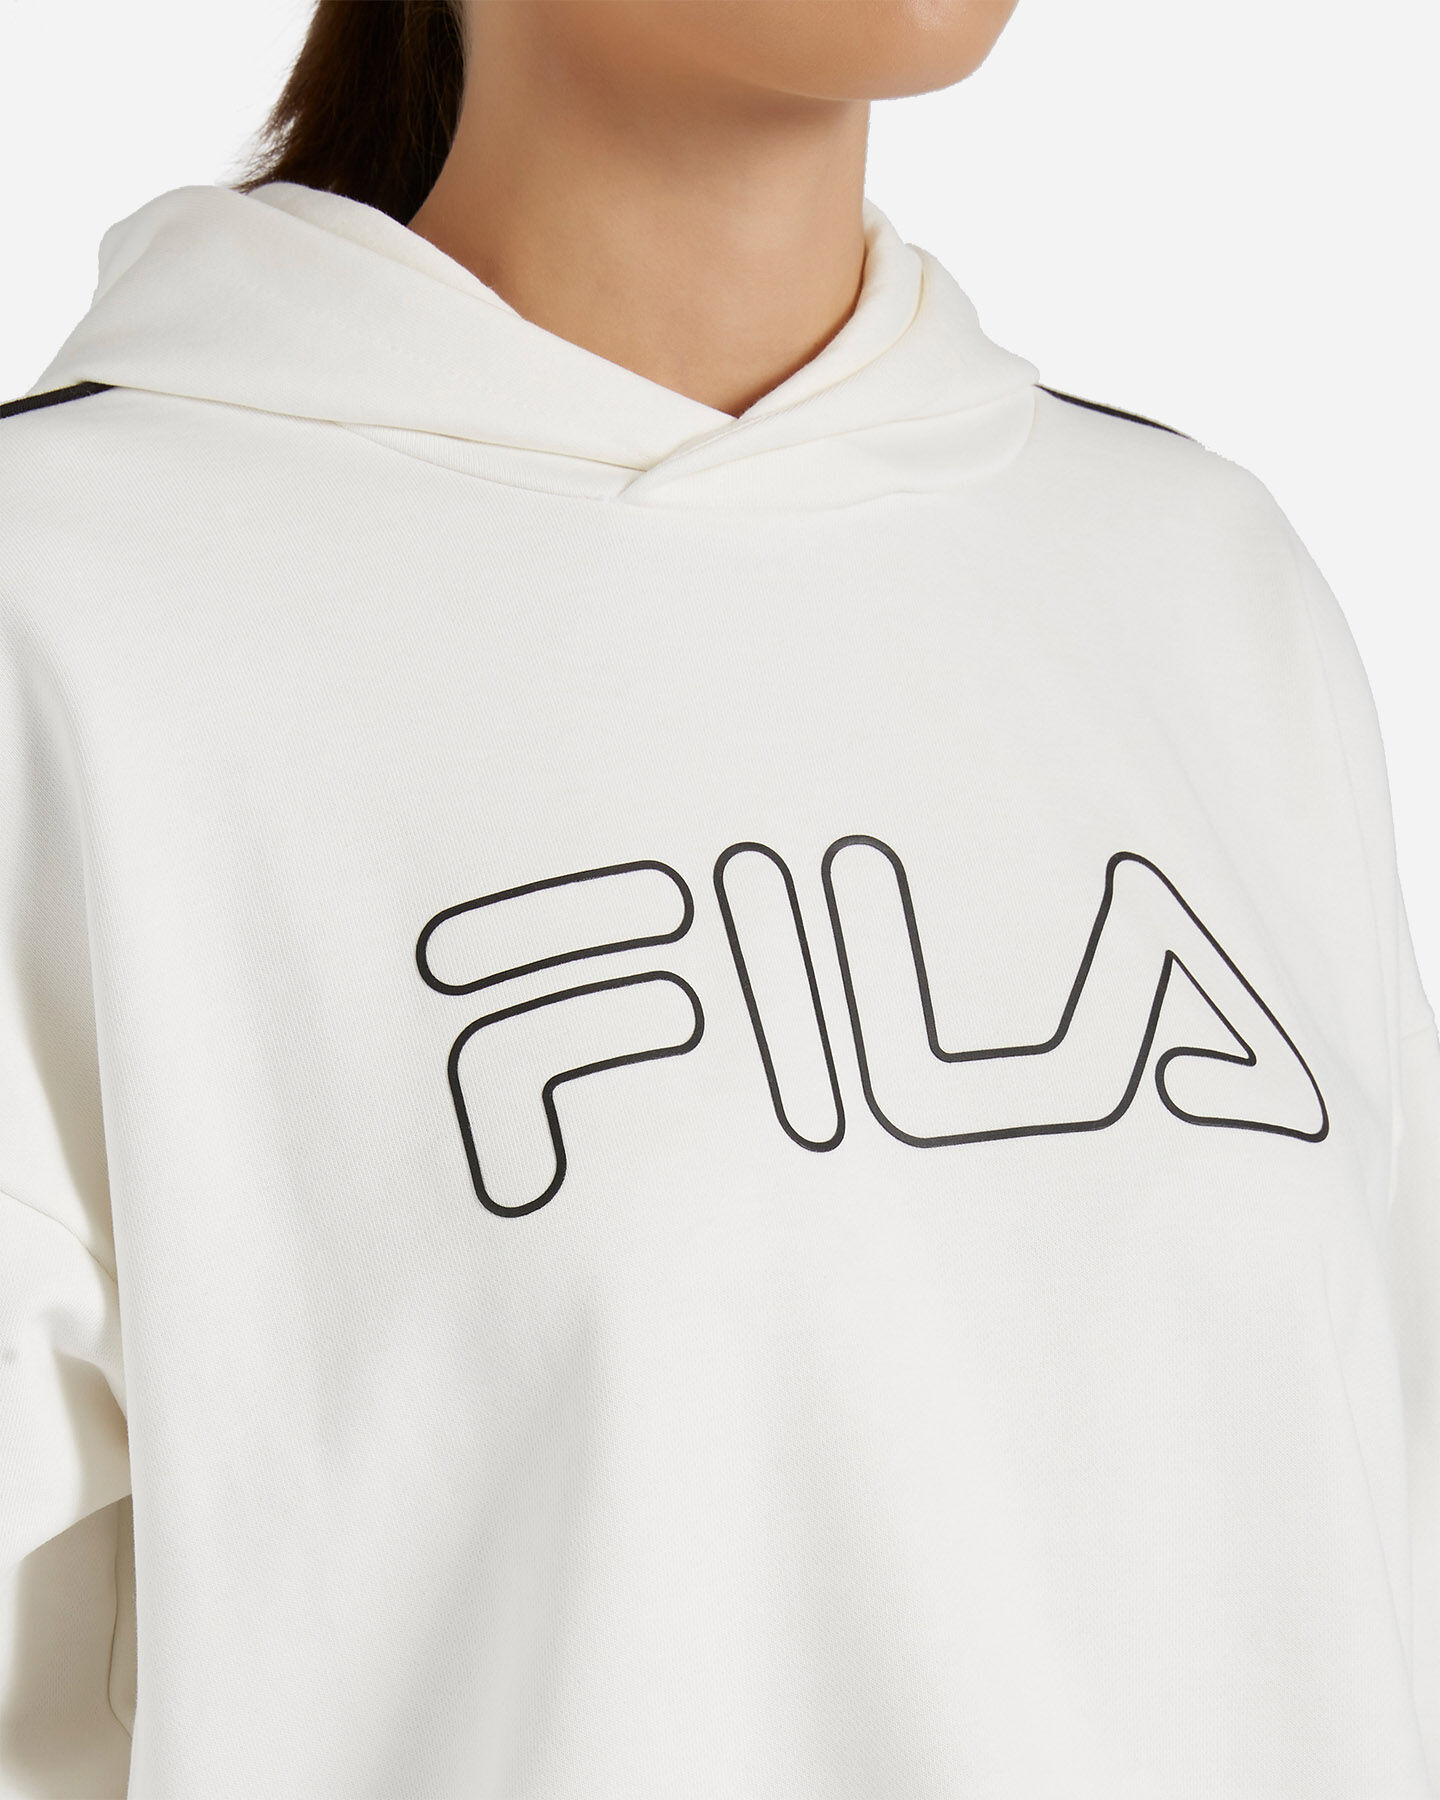  Felpa FILA COULISSE OUTLINE W S4093993|001|XS scatto 4